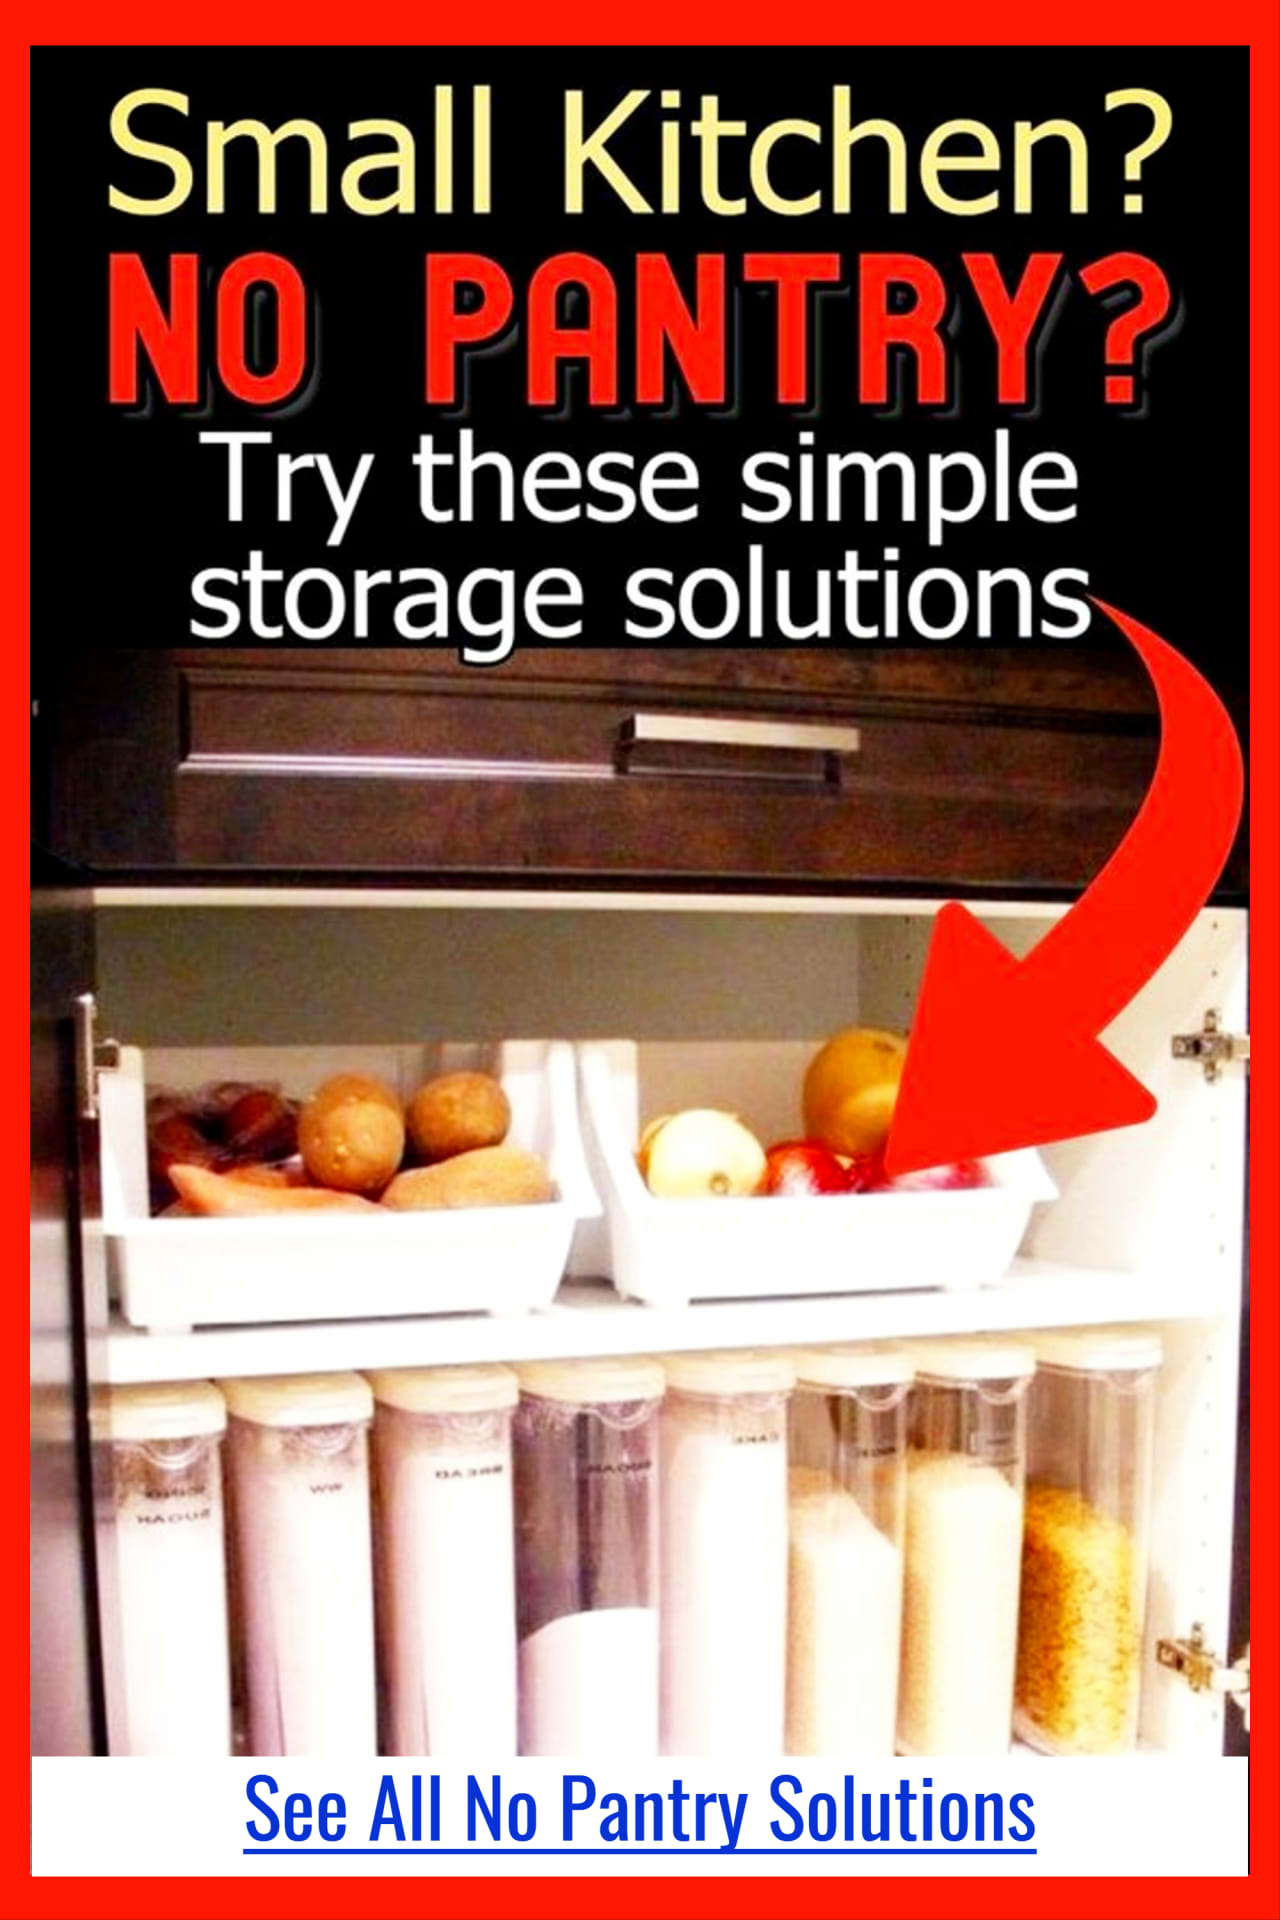 Pantry organization on a budget for small kitchens without a pantry or a small pantry with no storage space - no pantry solutions